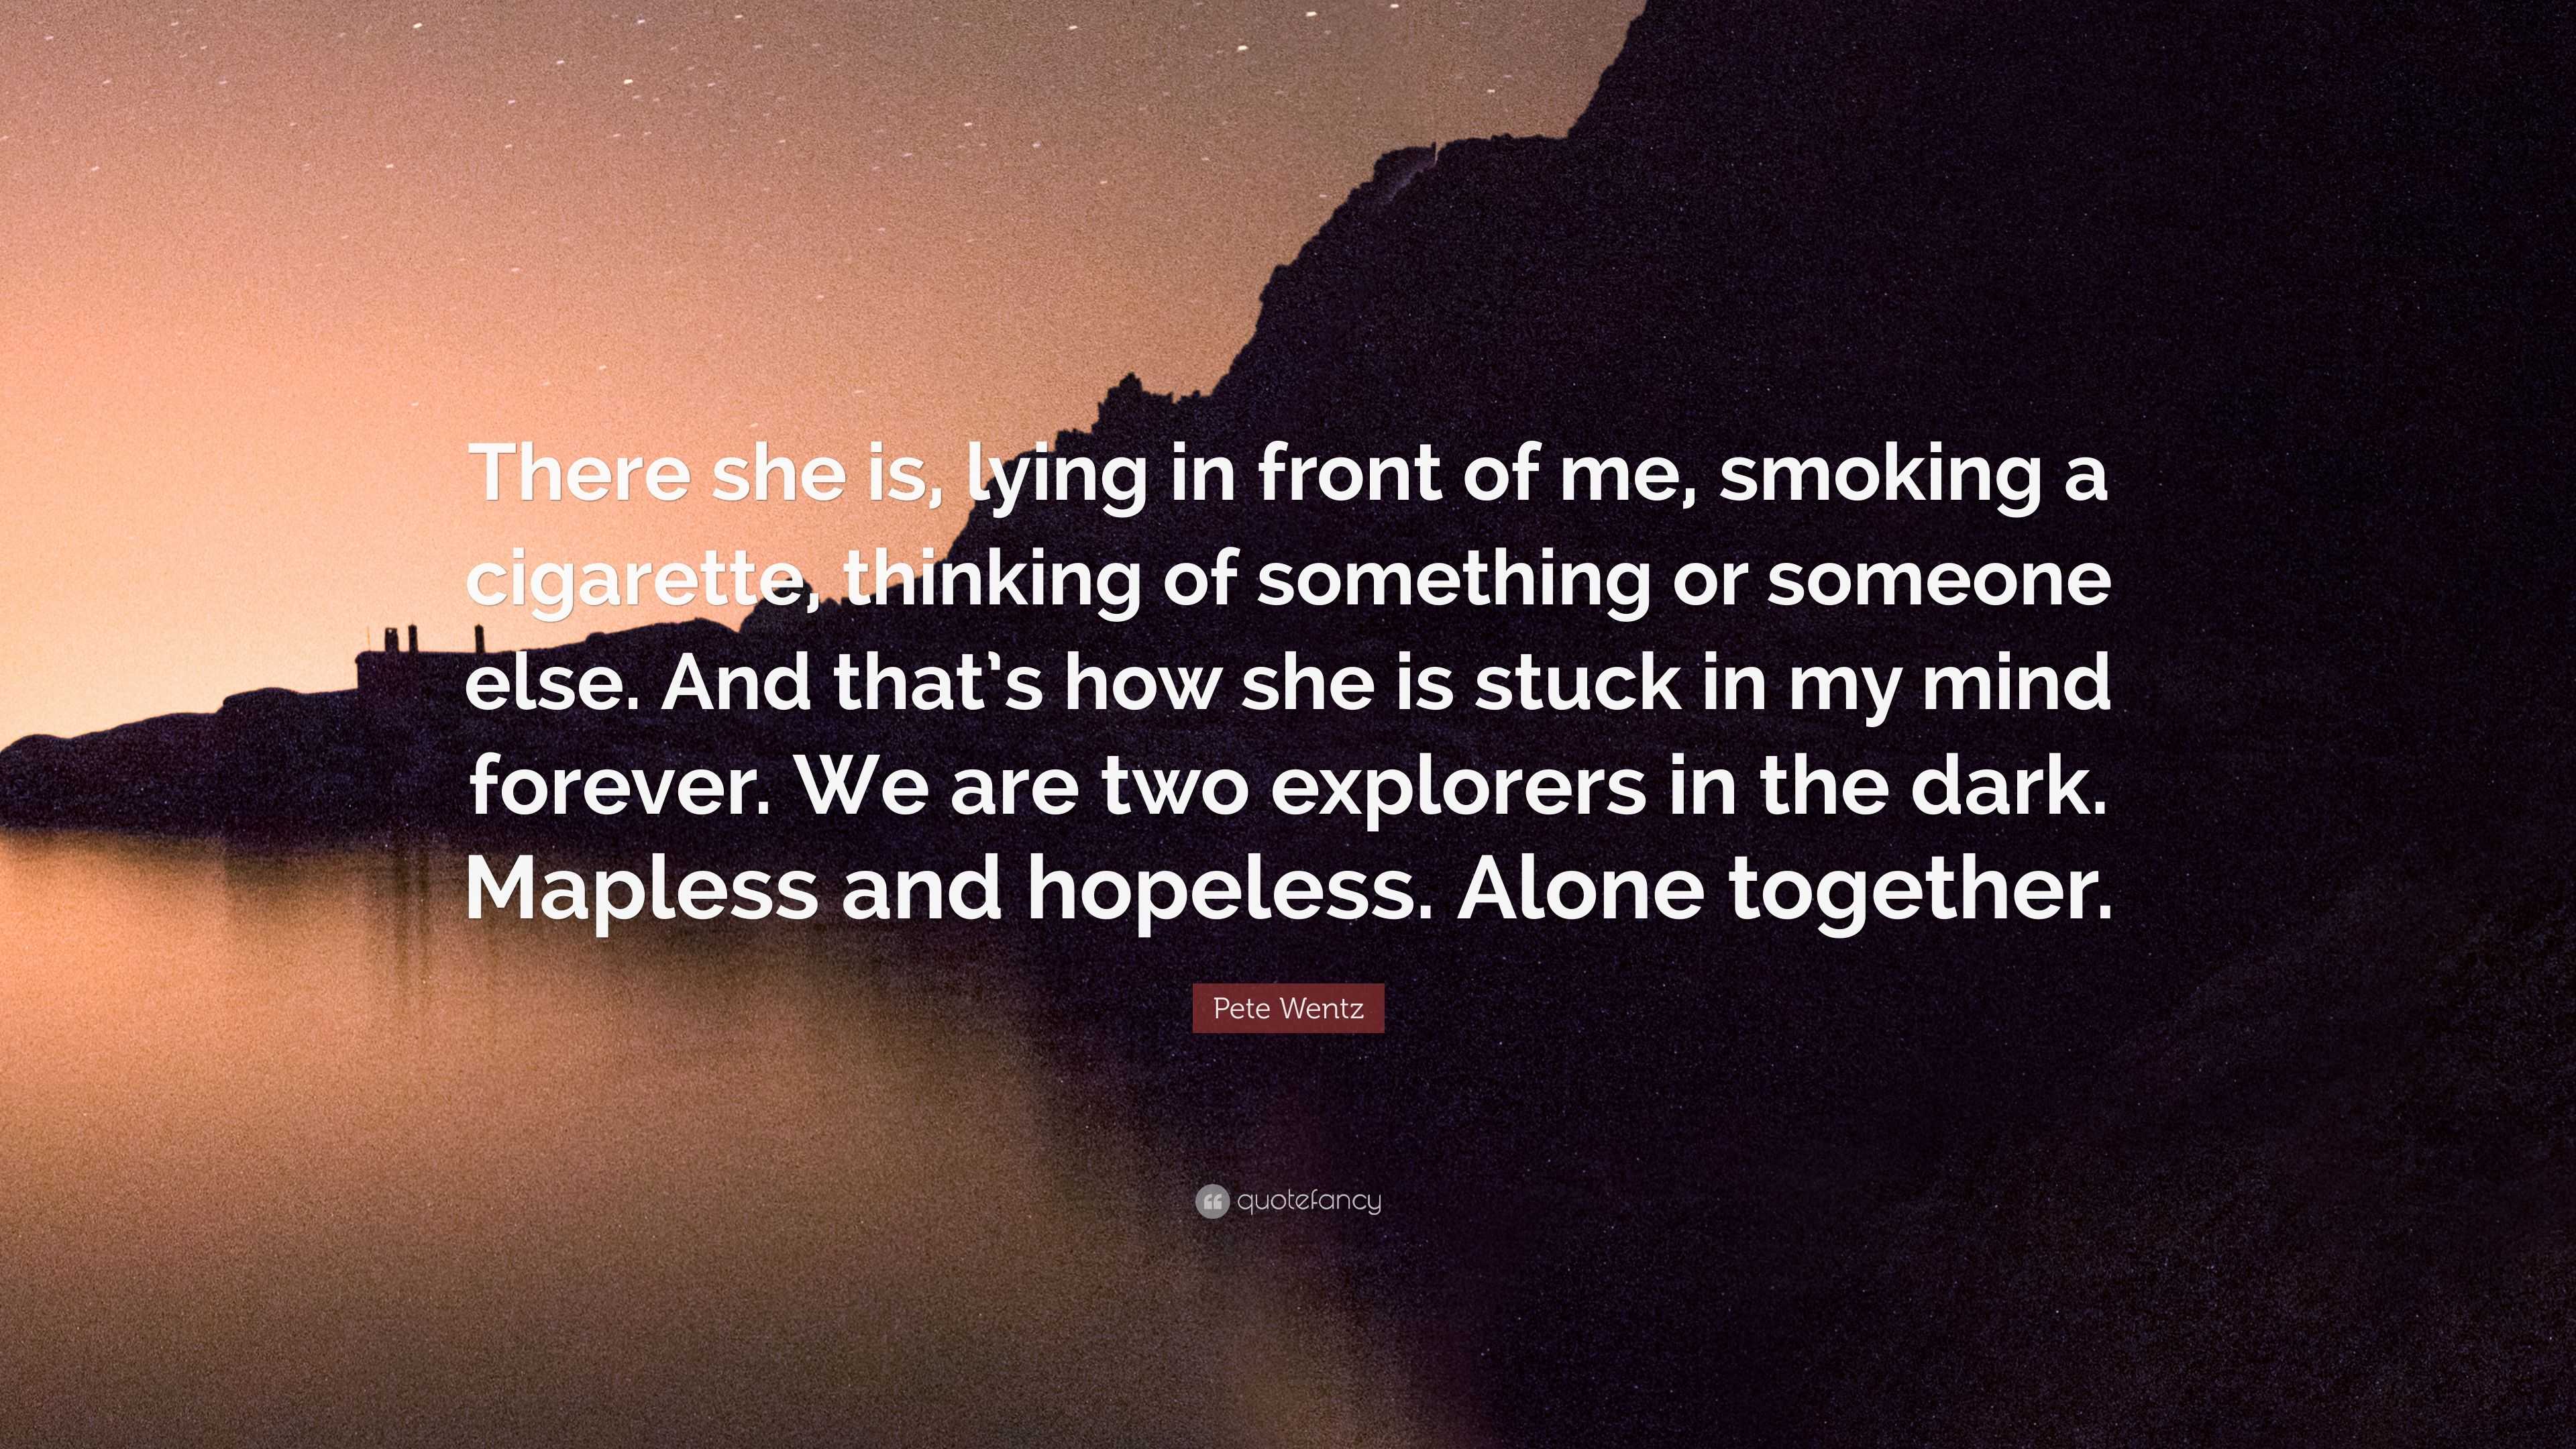 Pete Wentz Quote “There she is lying in front of me smoking